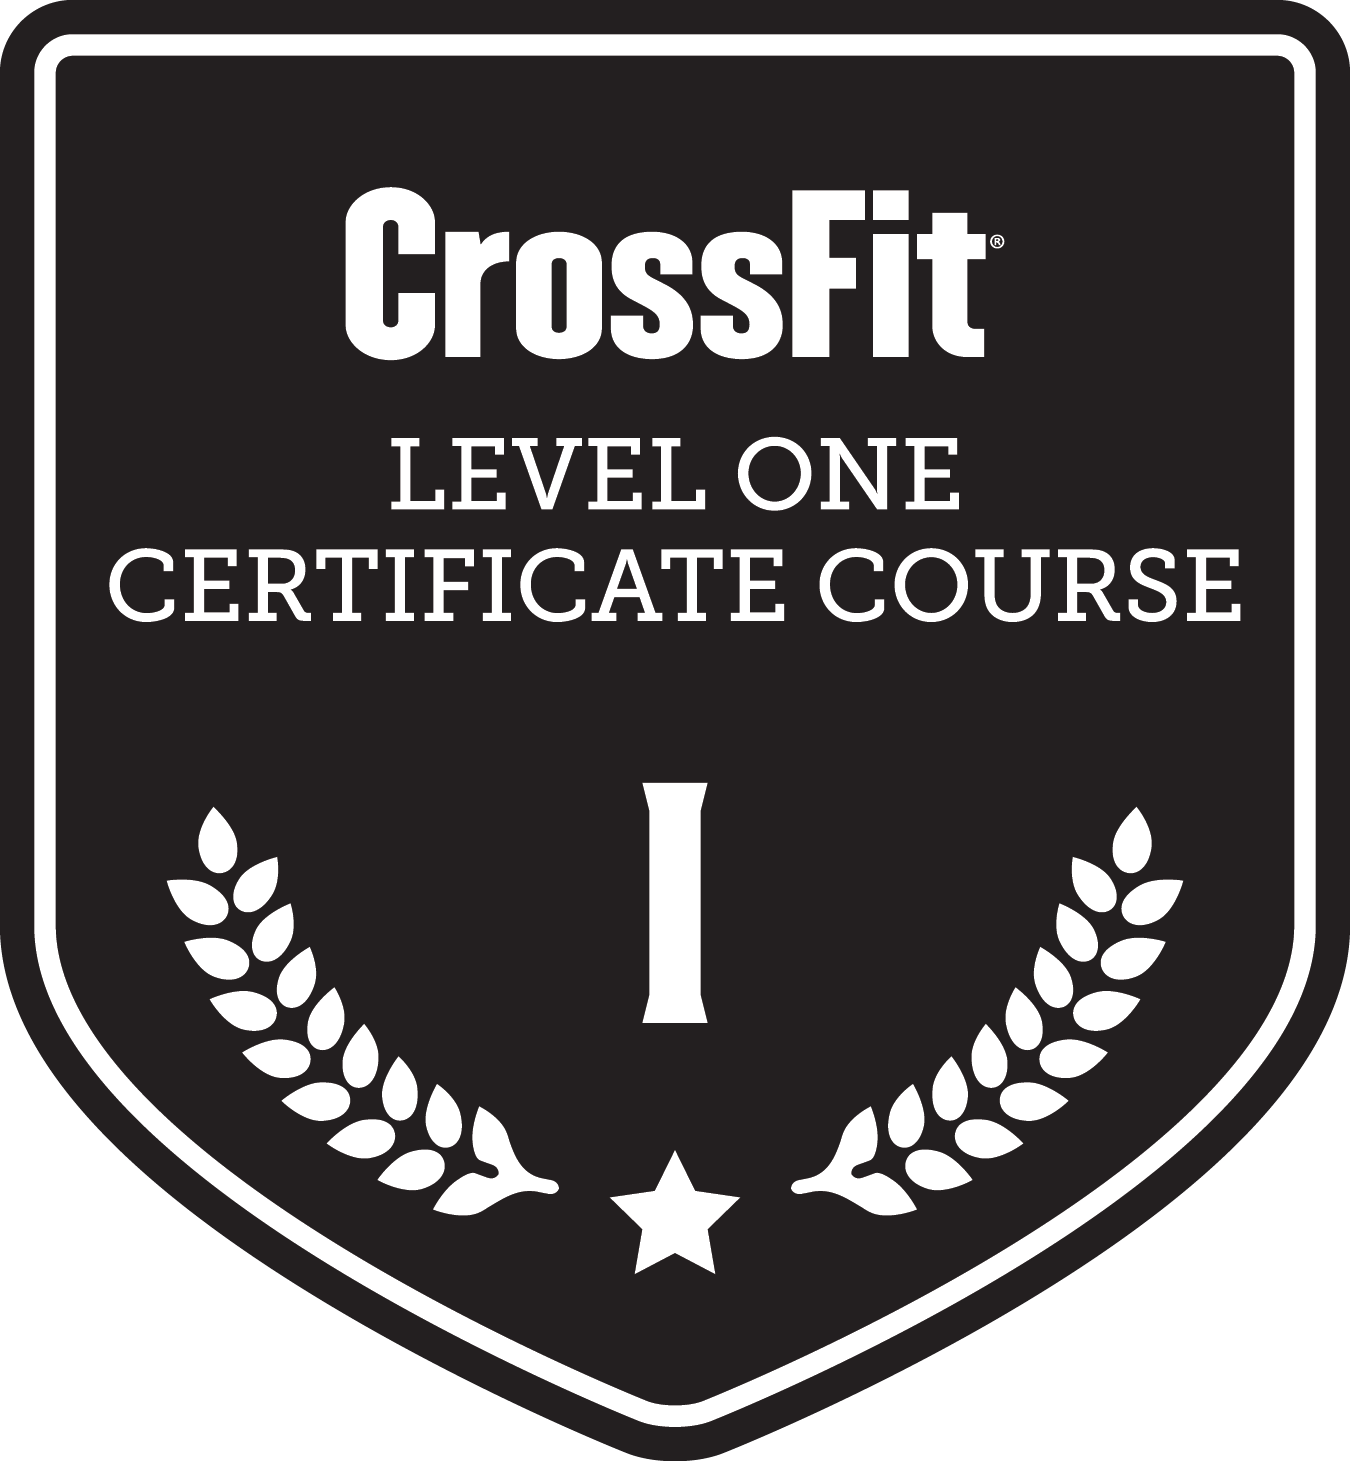 crossfit certification mauritius crossfit level one certificate course